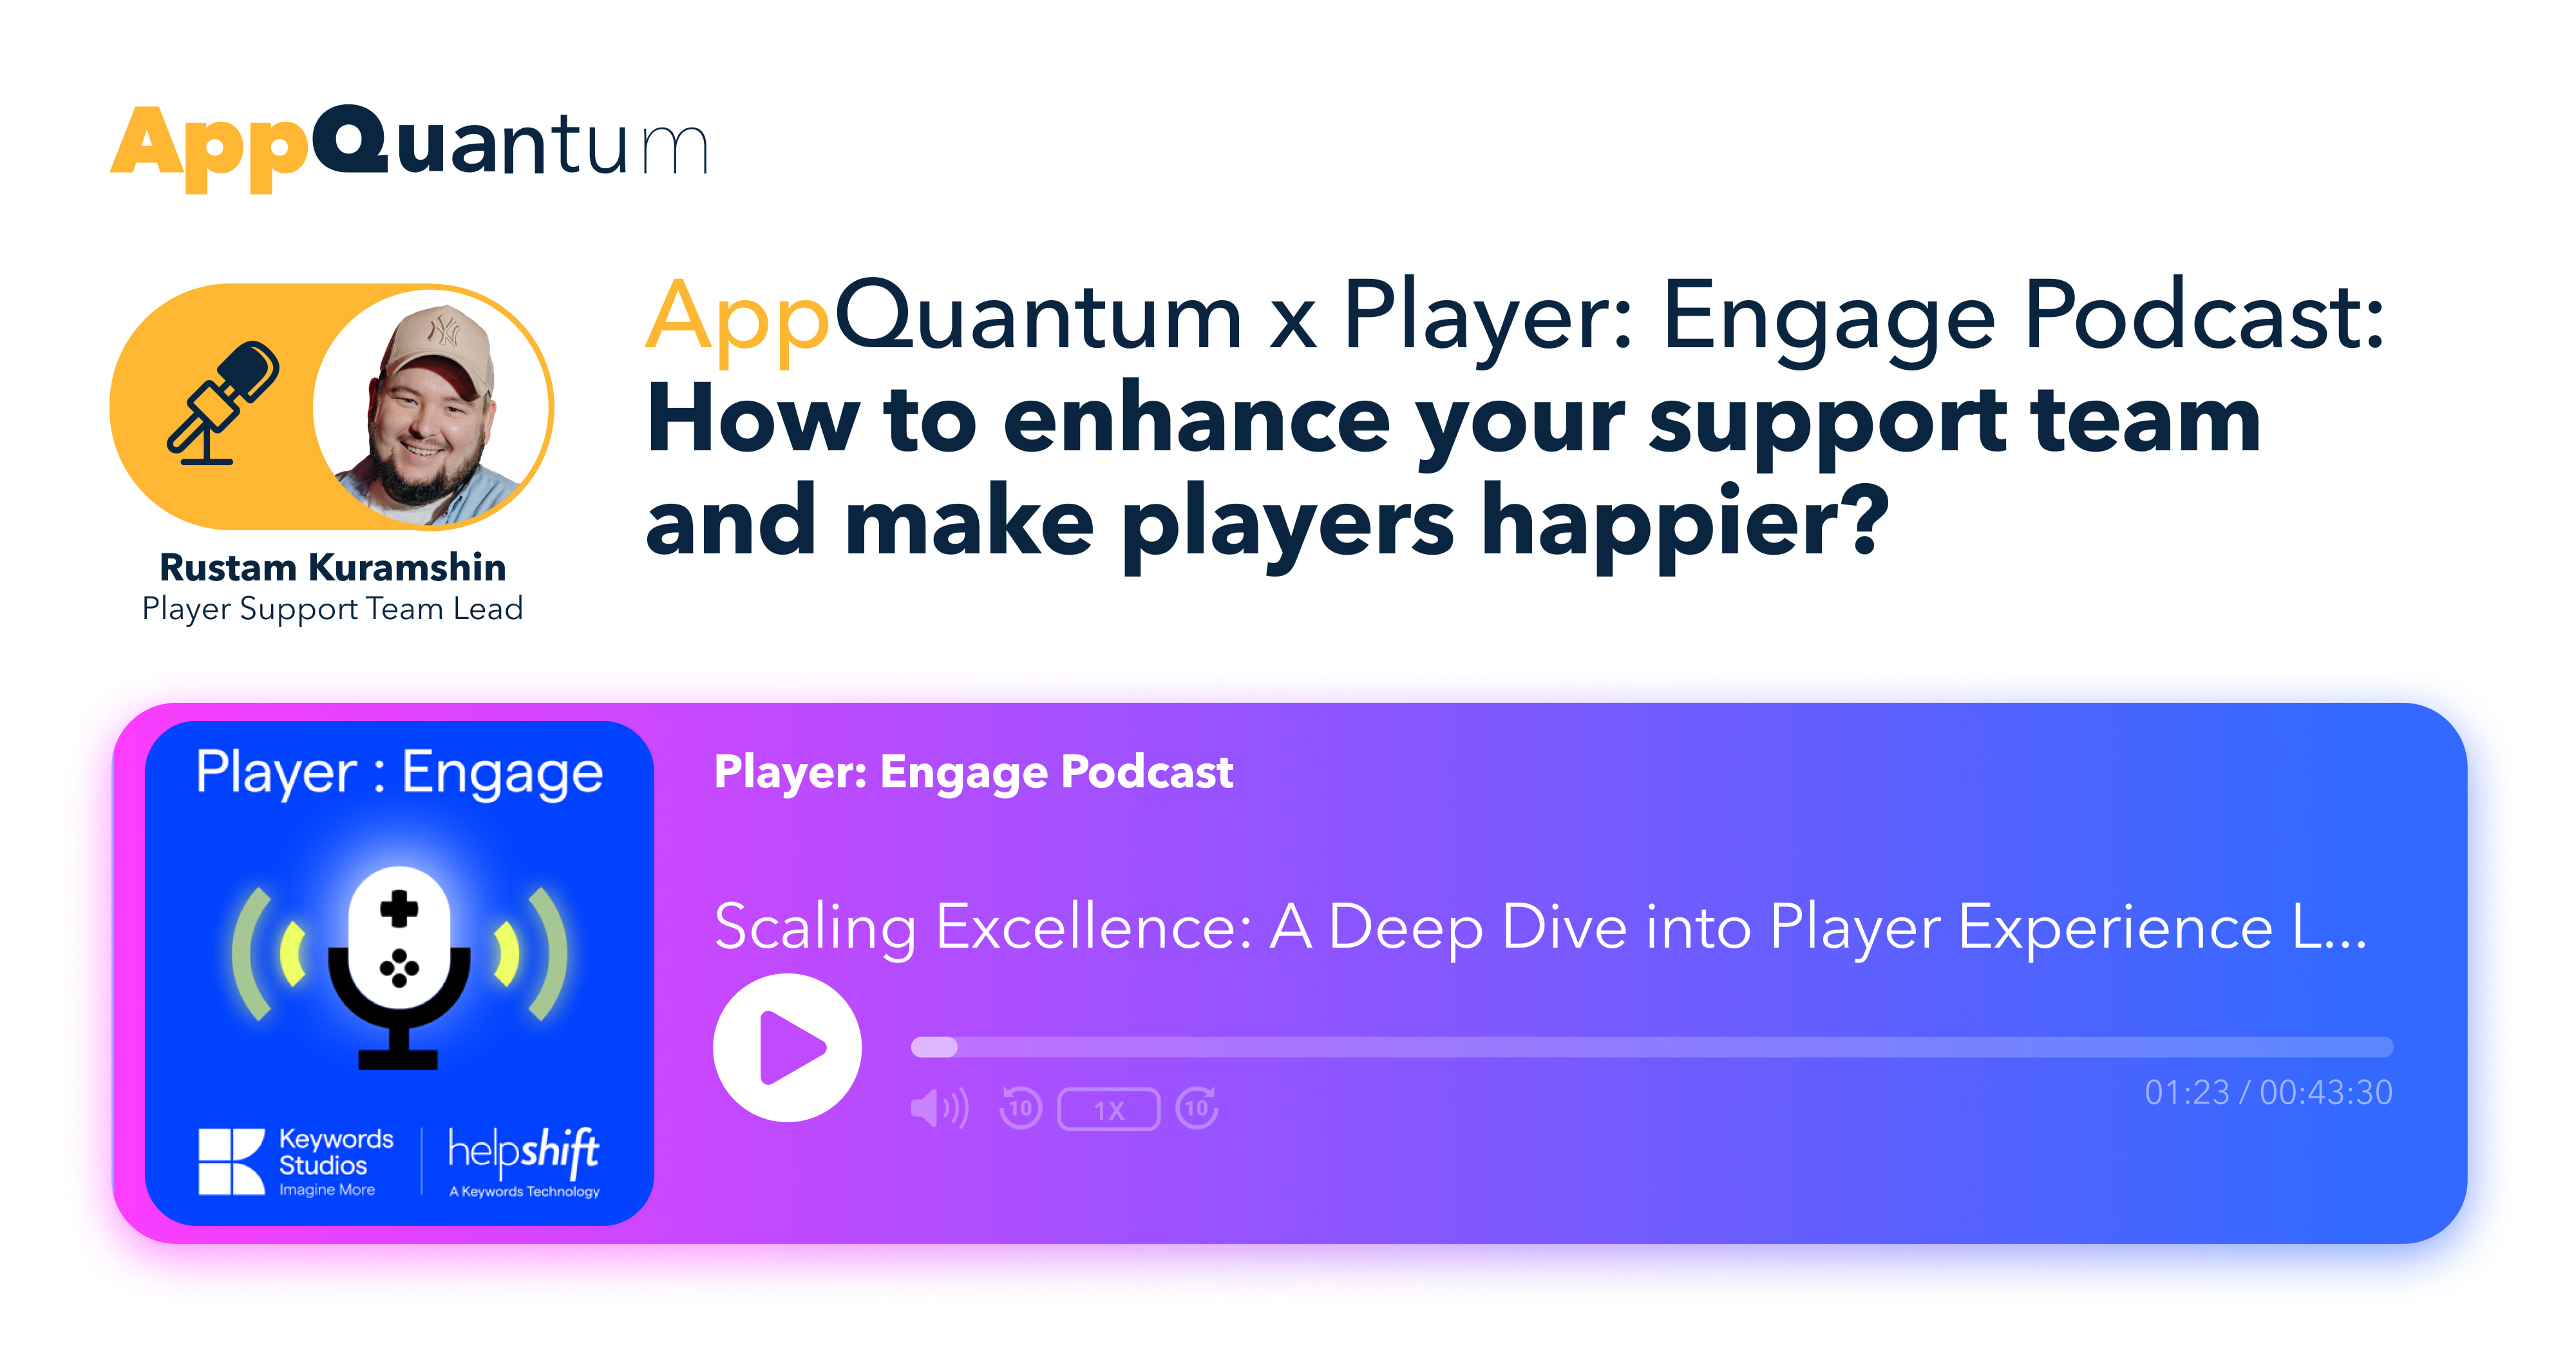 AppQuantum x Player Engage Podcast: How to Enhance Your Support Team and Make Players Happier?